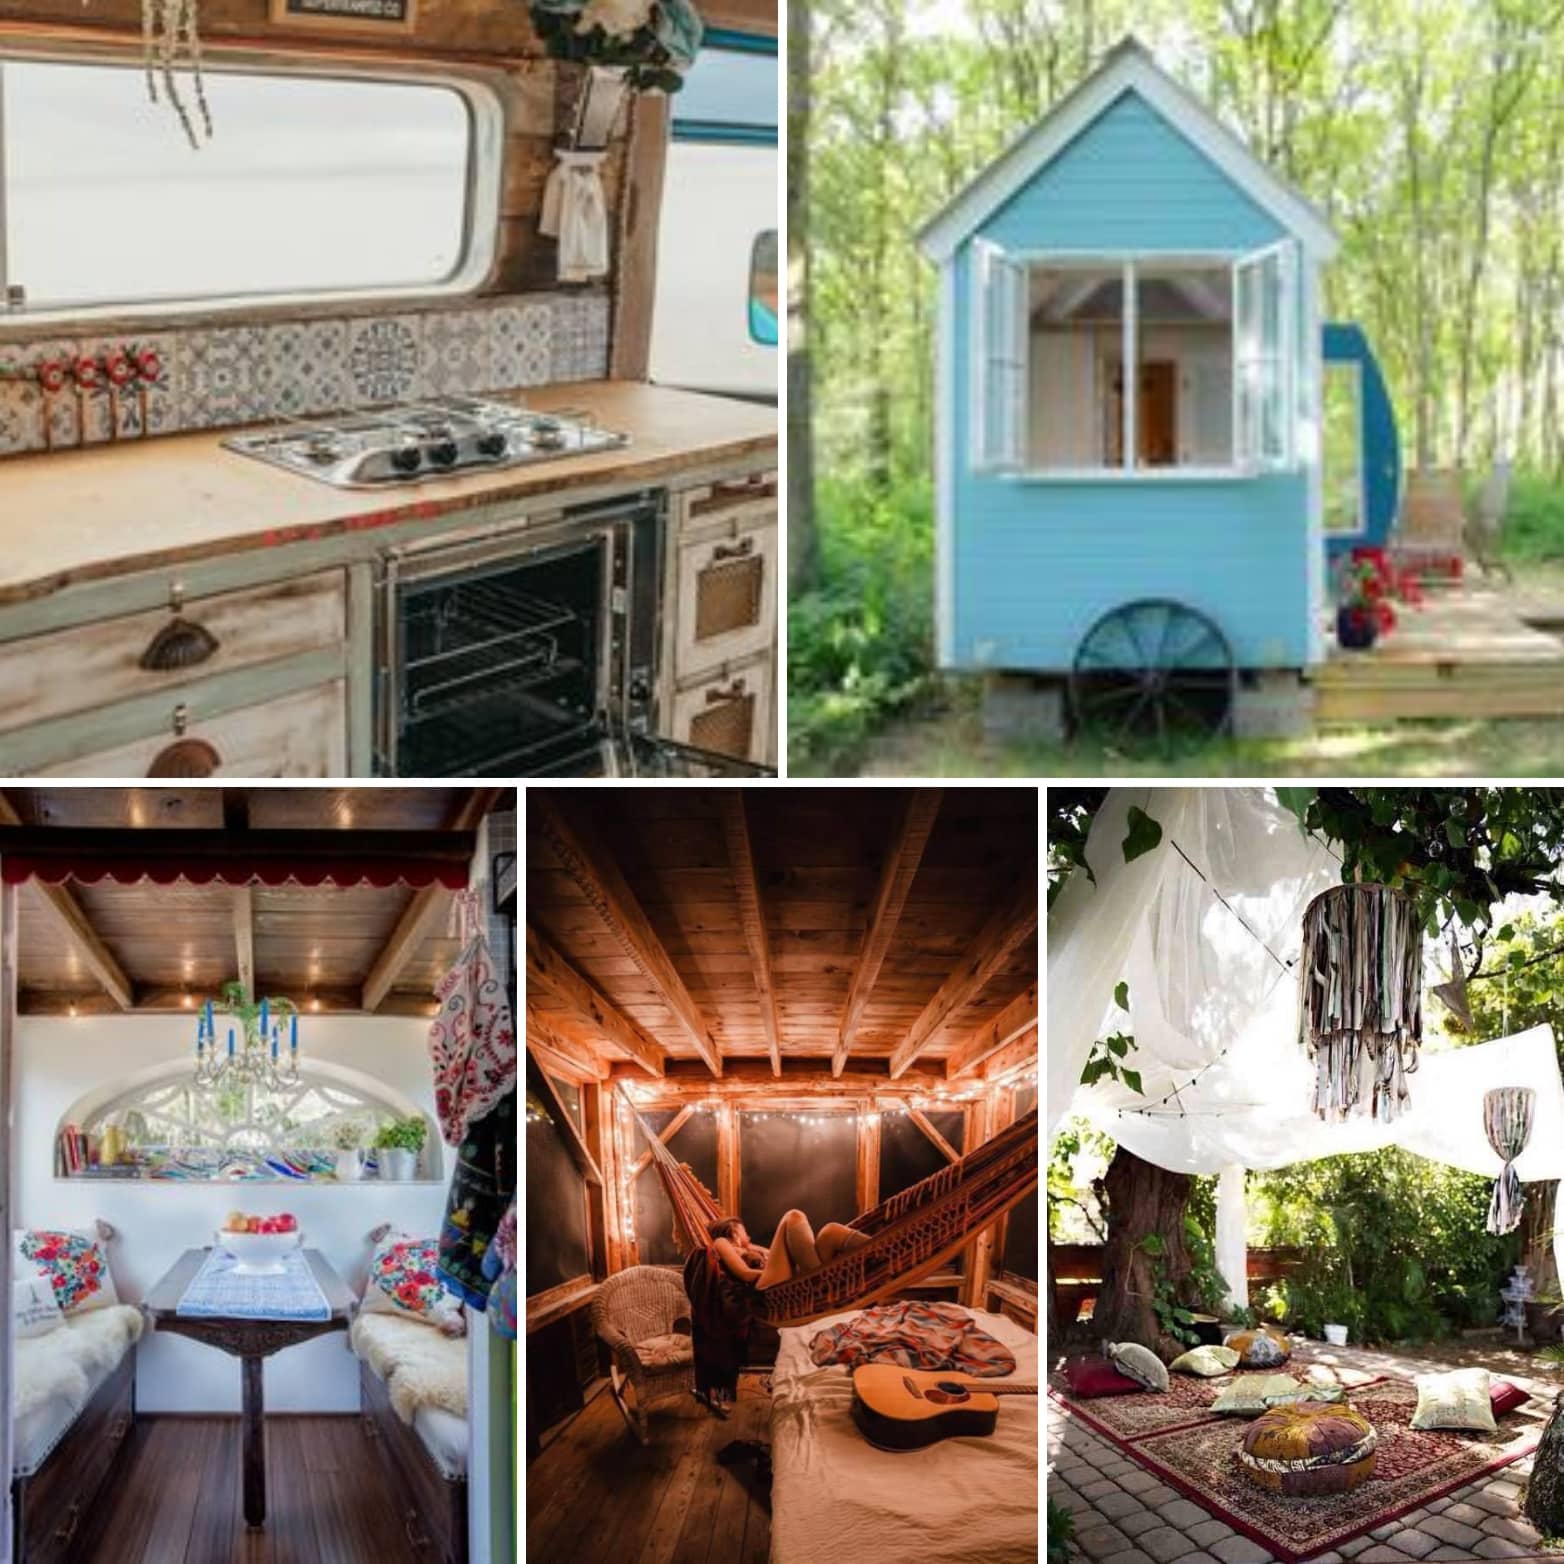 A bohemian life in a tiny house